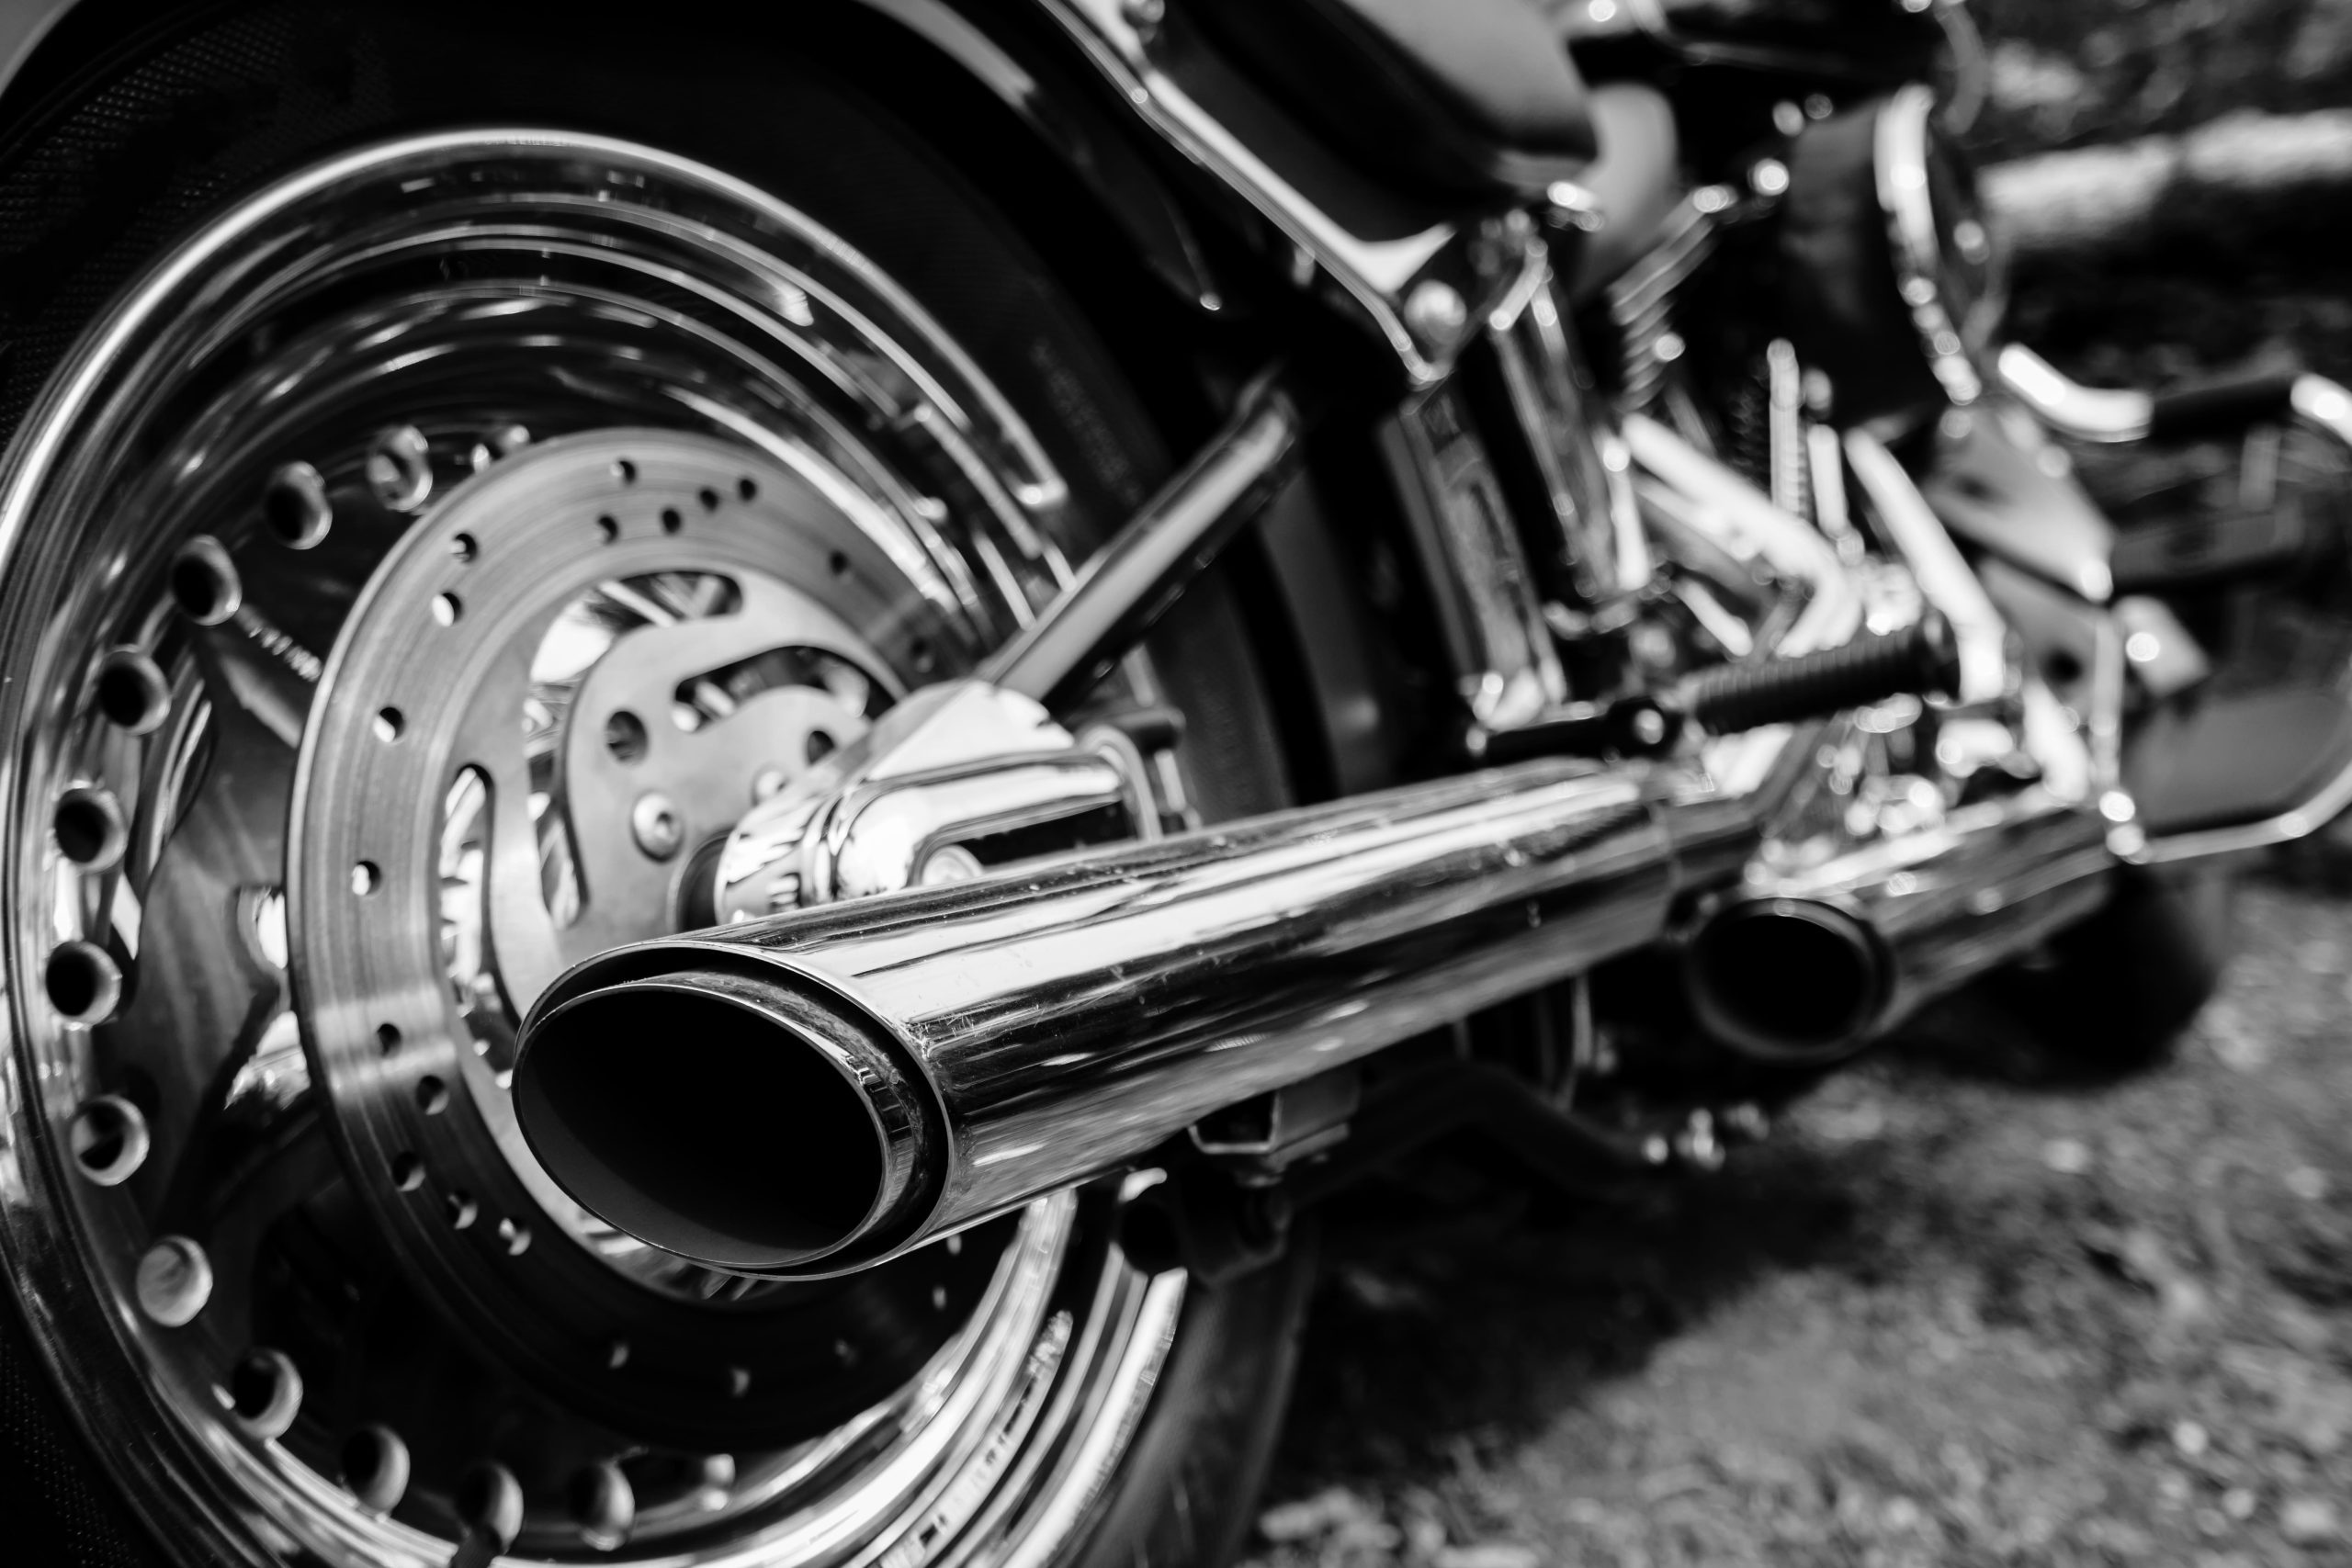 rear-view-of-motorcycle-exhaust-chrome-pipes-2021-10-06-09-51-50-utc